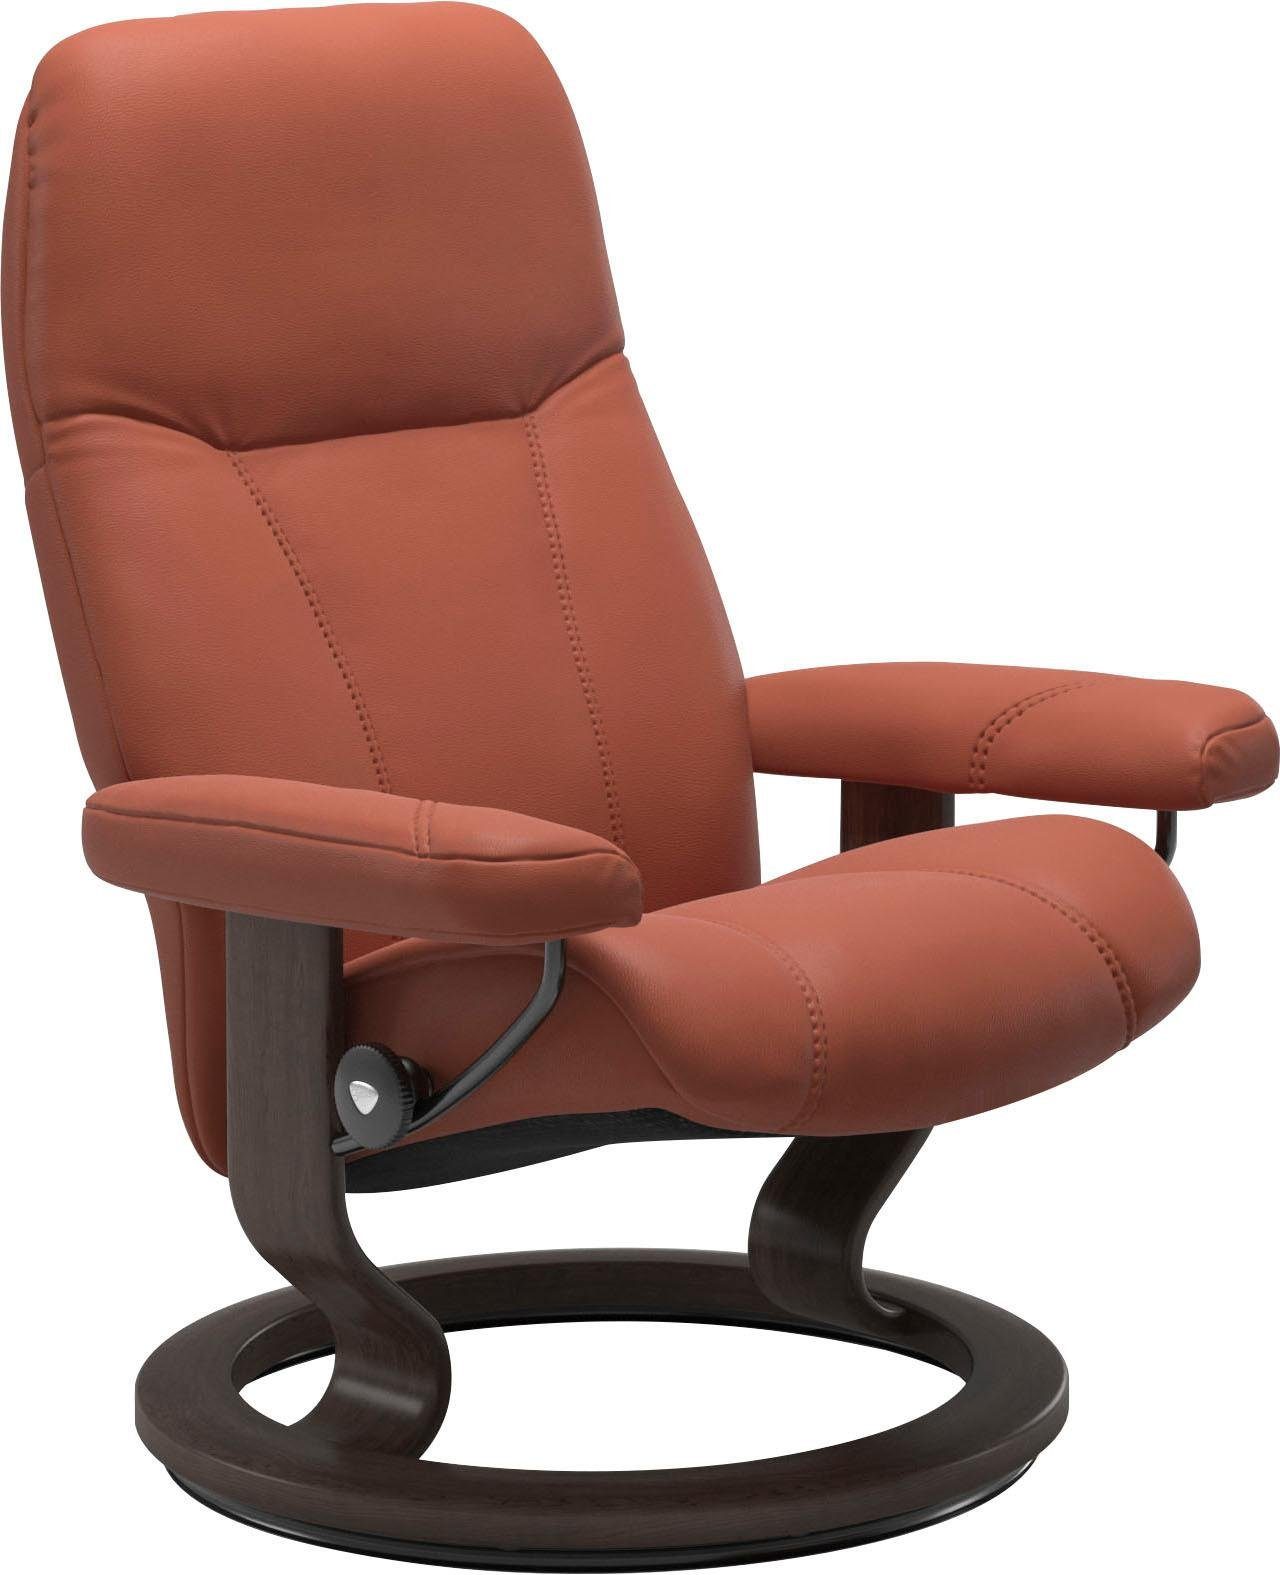 Wenge Gestell Consul, Relaxsessel M, Stressless® Classic mit Base, Größe